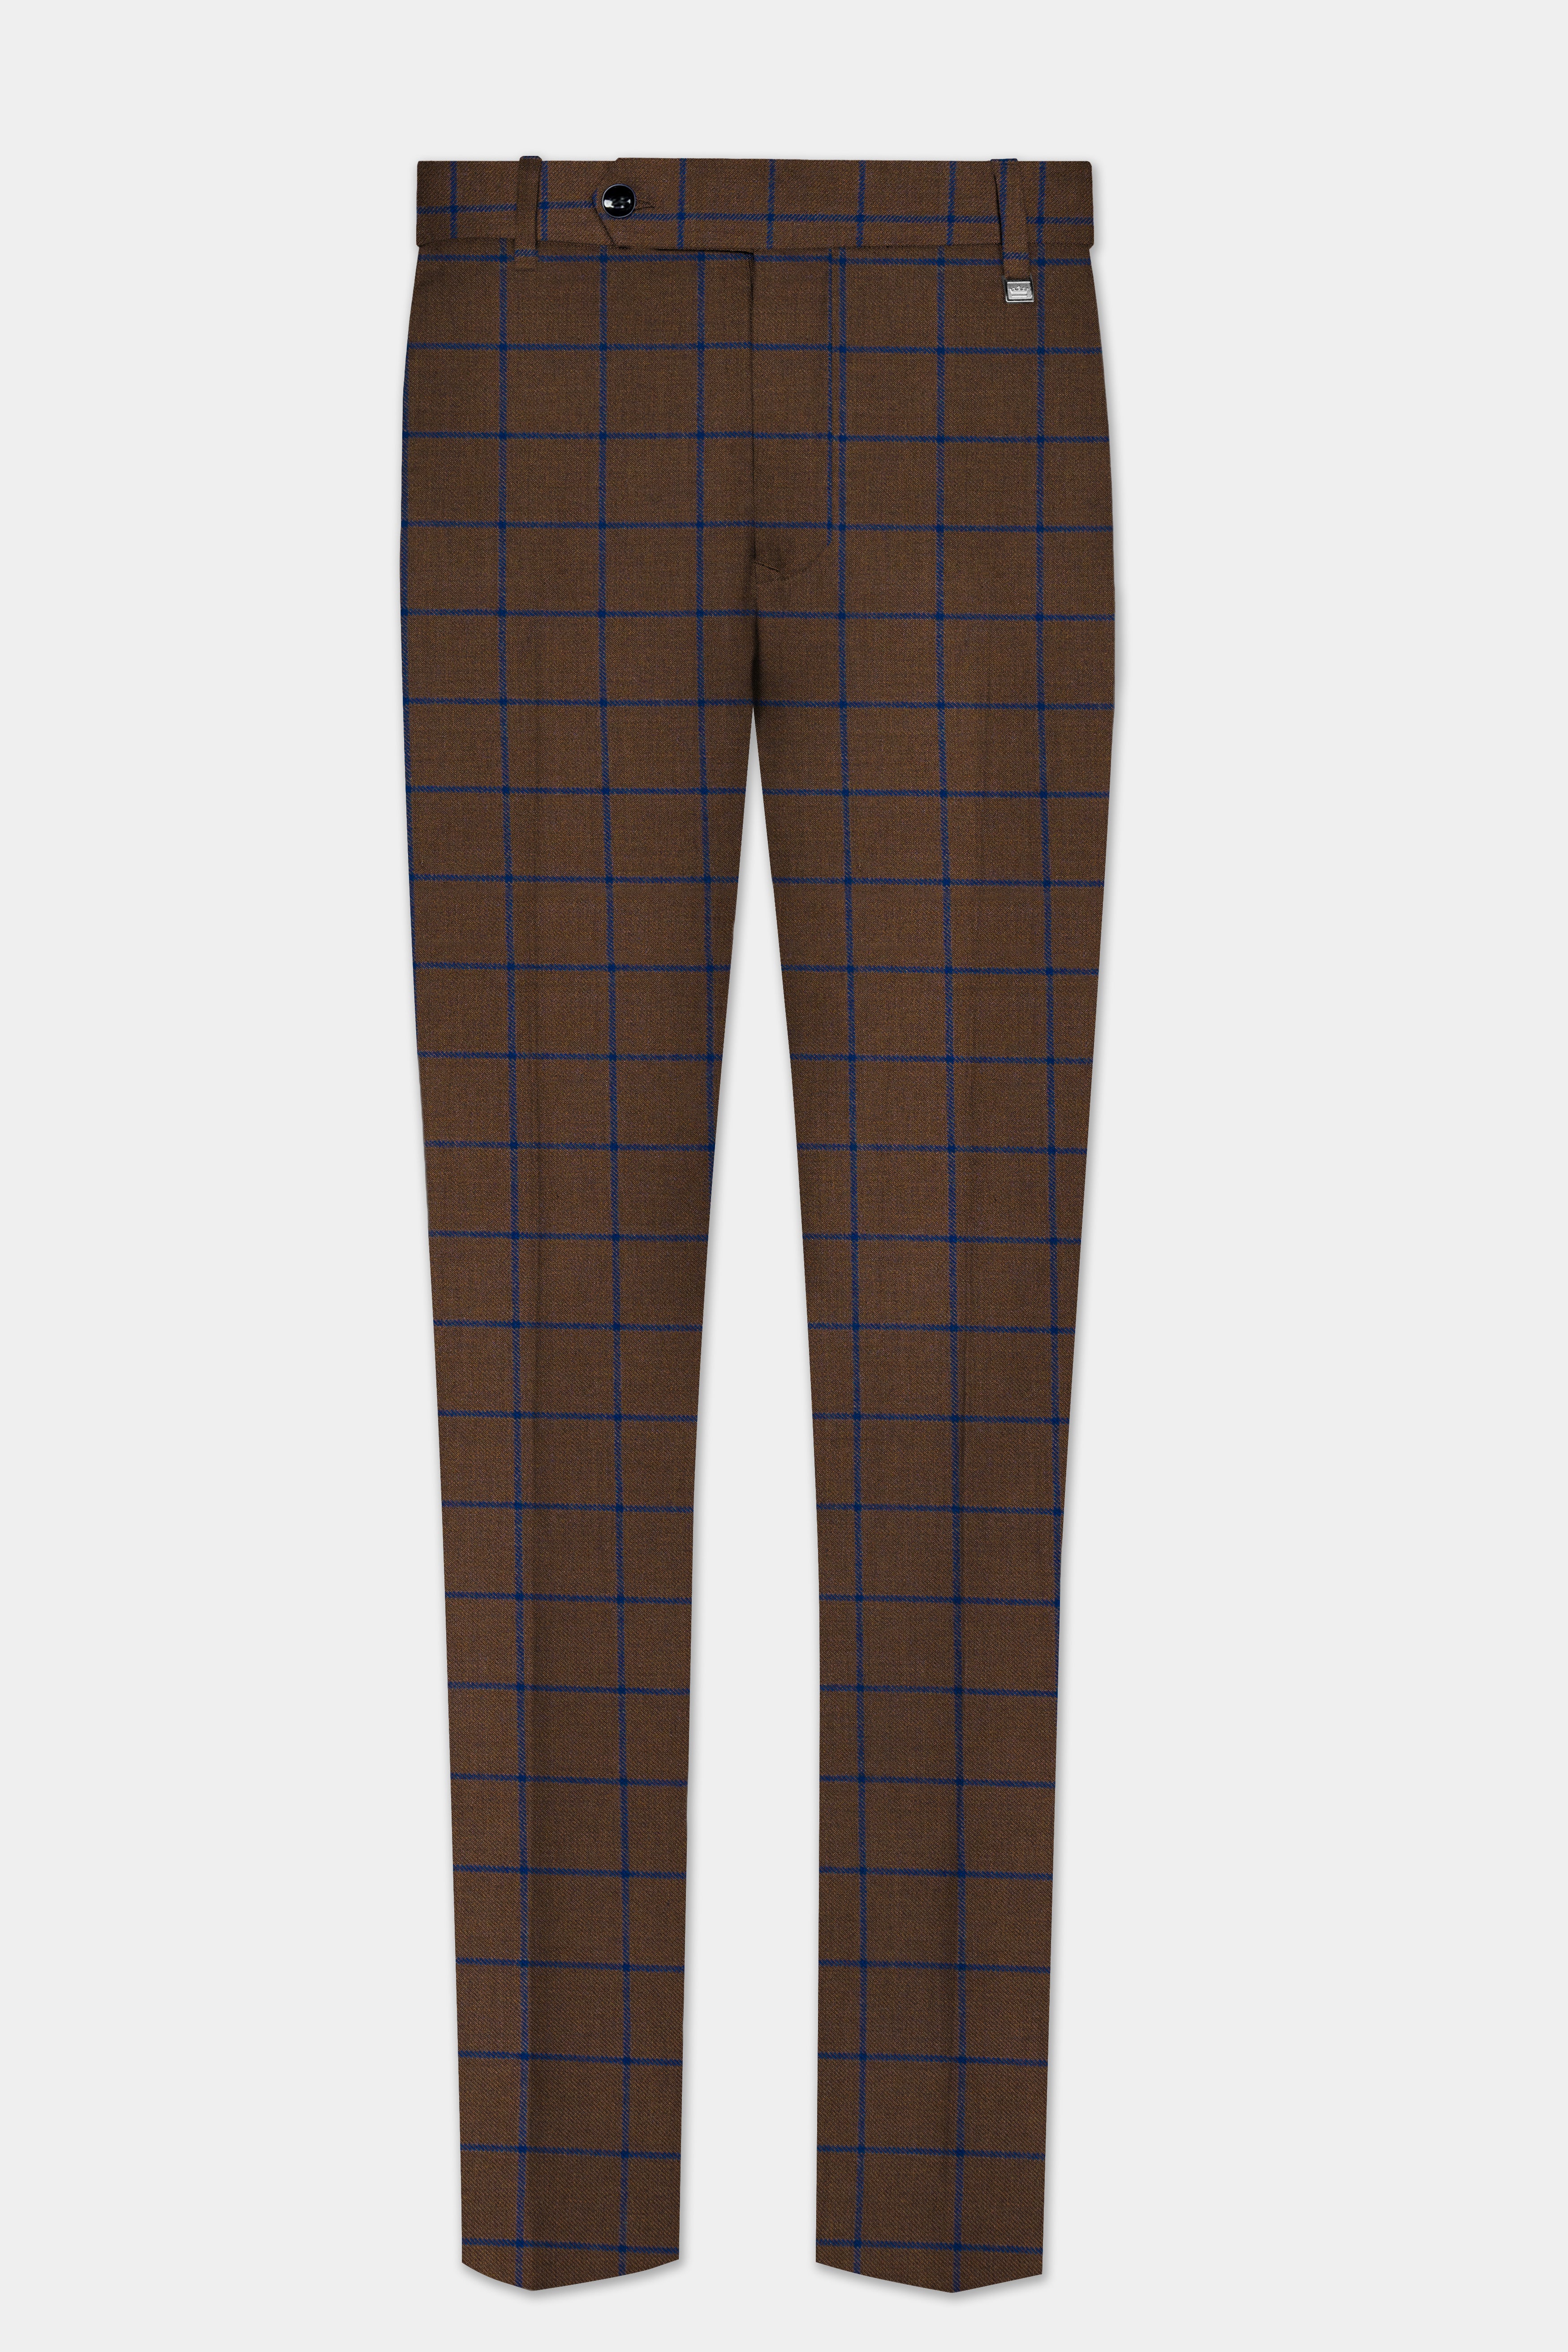 Bistre Brown with Catalina Blue Windowpane Tuxedo Tweed Suit